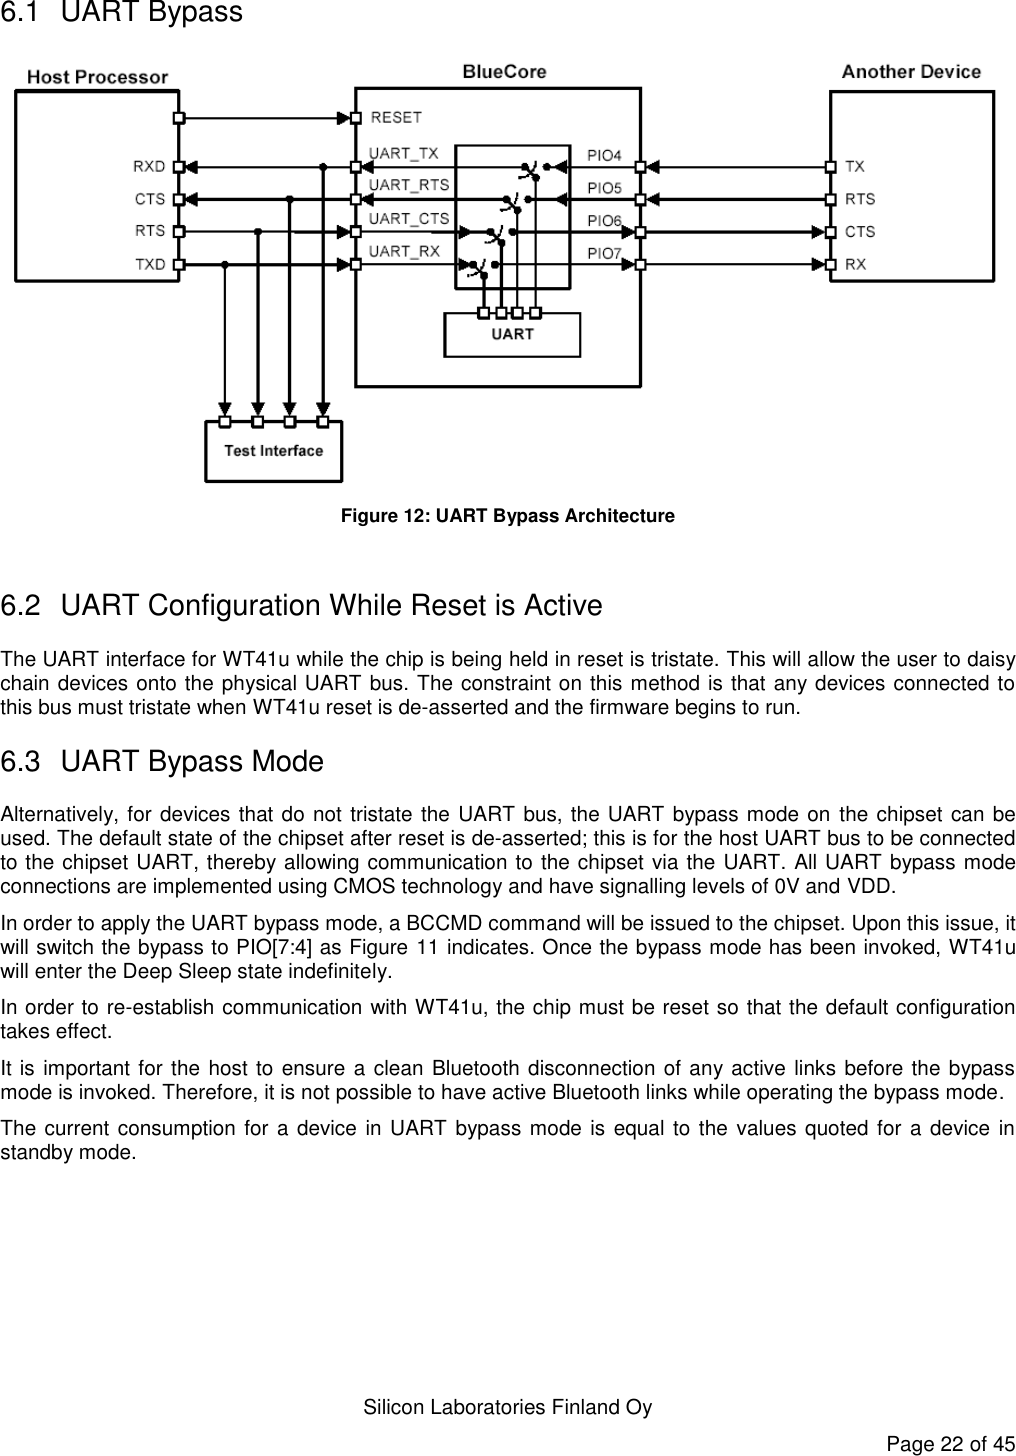   Silicon Laboratories Finland Oy Page 22 of 45 6.1  UART Bypass  Figure 12: UART Bypass Architecture  6.2  UART Configuration While Reset is Active The UART interface for WT41u while the chip is being held in reset is tristate. This will allow the user to daisy chain devices onto the physical UART bus. The constraint on this method is that any devices connected to this bus must tristate when WT41u reset is de-asserted and the firmware begins to run. 6.3  UART Bypass Mode Alternatively, for devices that do not tristate the UART bus, the UART bypass mode on the chipset can be used. The default state of the chipset after reset is de-asserted; this is for the host UART bus to be connected to the chipset UART, thereby allowing communication to the chipset via the UART. All UART bypass mode connections are implemented using CMOS technology and have signalling levels of 0V and VDD. In order to apply the UART bypass mode, a BCCMD command will be issued to the chipset. Upon this issue, it will switch the bypass to PIO[7:4] as Figure 11 indicates. Once the bypass mode has been invoked, WT41u will enter the Deep Sleep state indefinitely. In order to re-establish communication with WT41u, the chip must be reset so that the default configuration takes effect. It is important for the host to ensure a clean Bluetooth disconnection of any active links before the bypass mode is invoked. Therefore, it is not possible to have active Bluetooth links while operating the bypass mode. The current consumption for a device in UART bypass mode is equal to the values  quoted for a device in standby mode. 